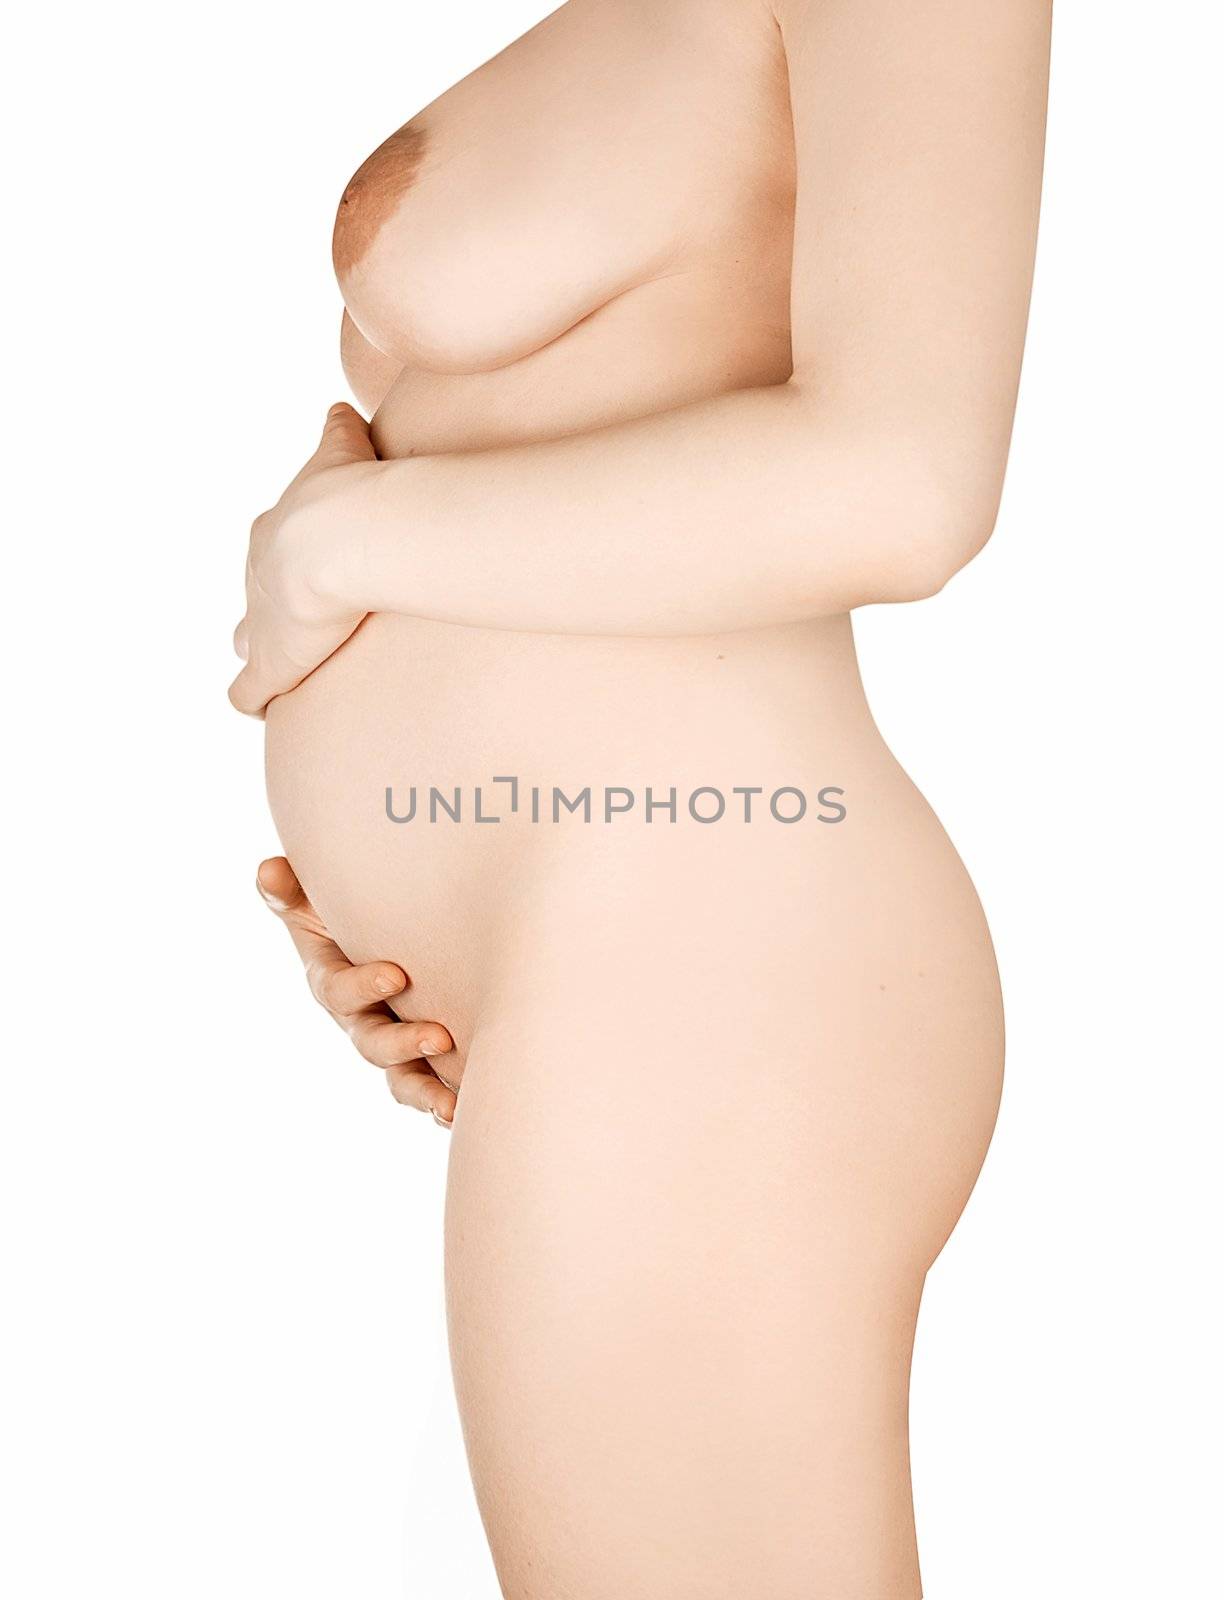 Naked pregnant woman standing over a white background